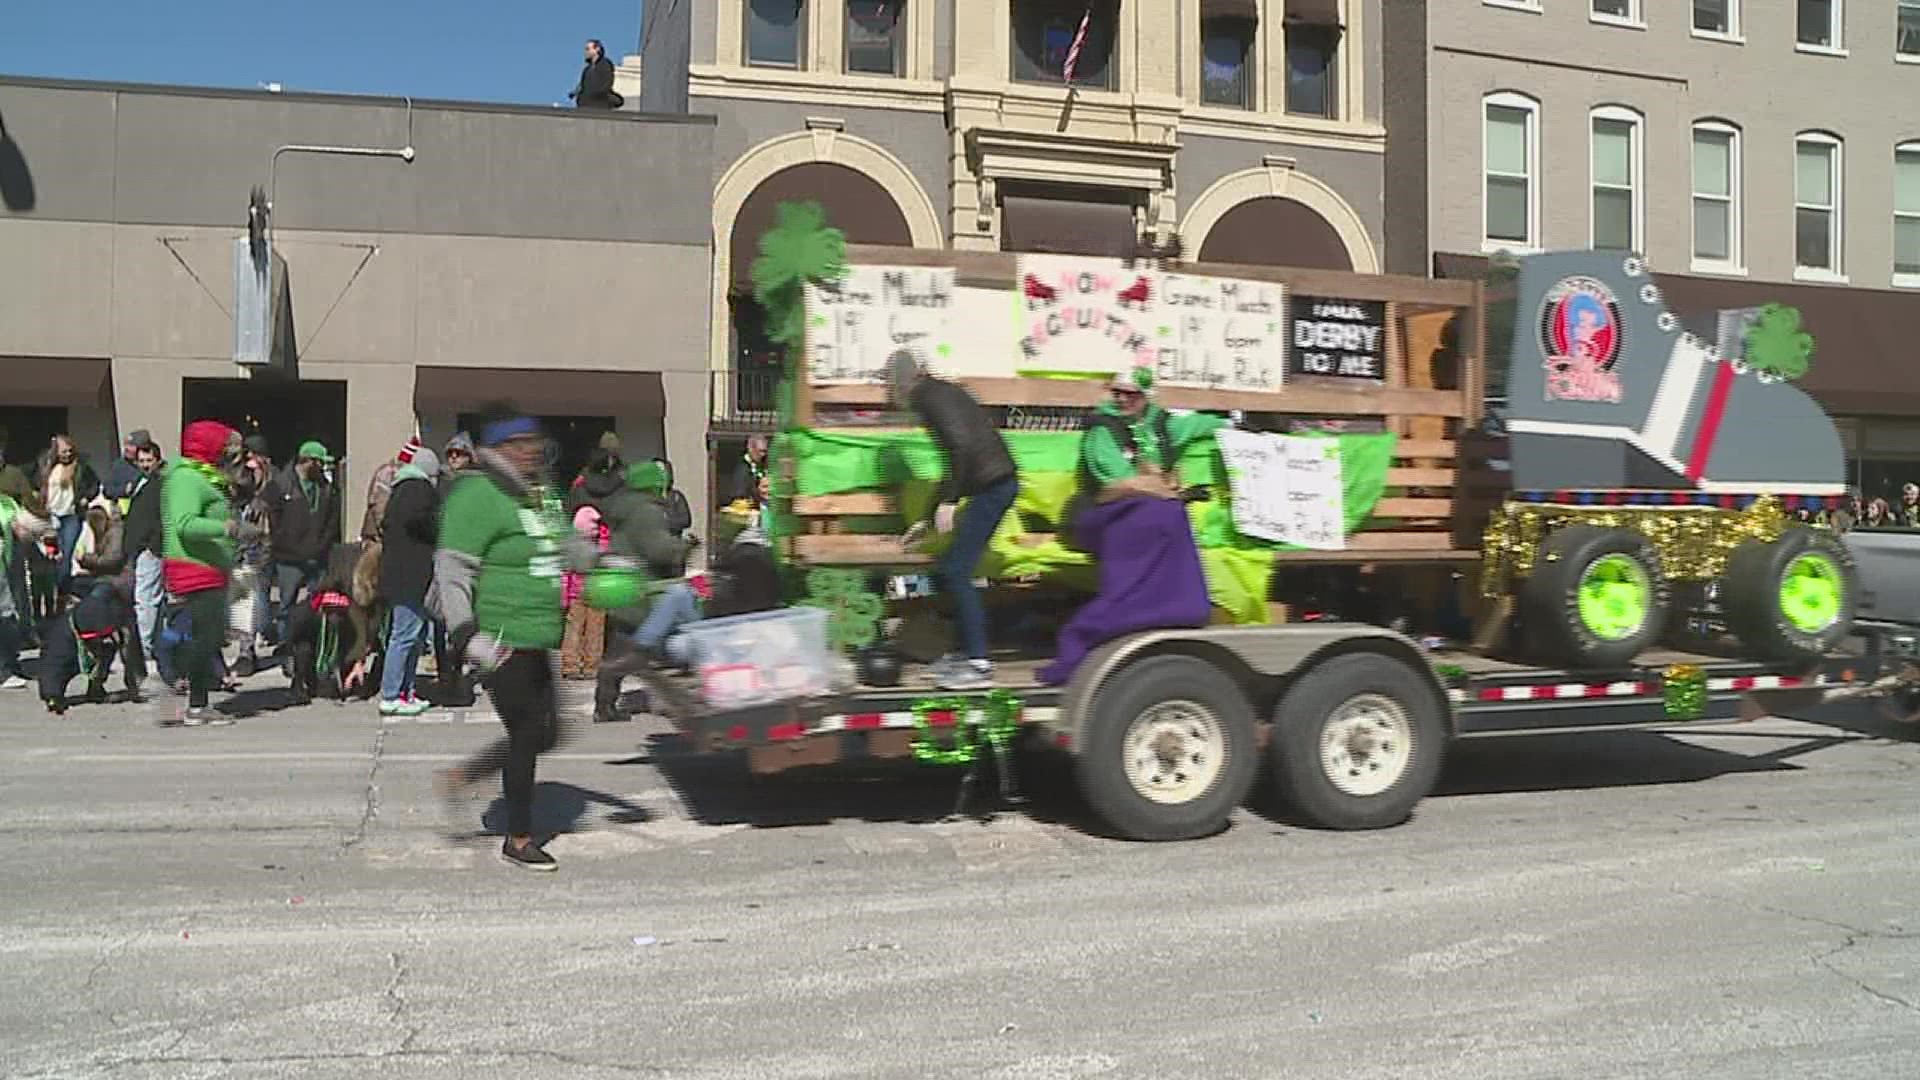 The weather was cold and crowds were smaller for the return of the St. Patrick's Day Grand Parade, but parade-goers still found plenty to celebrate.